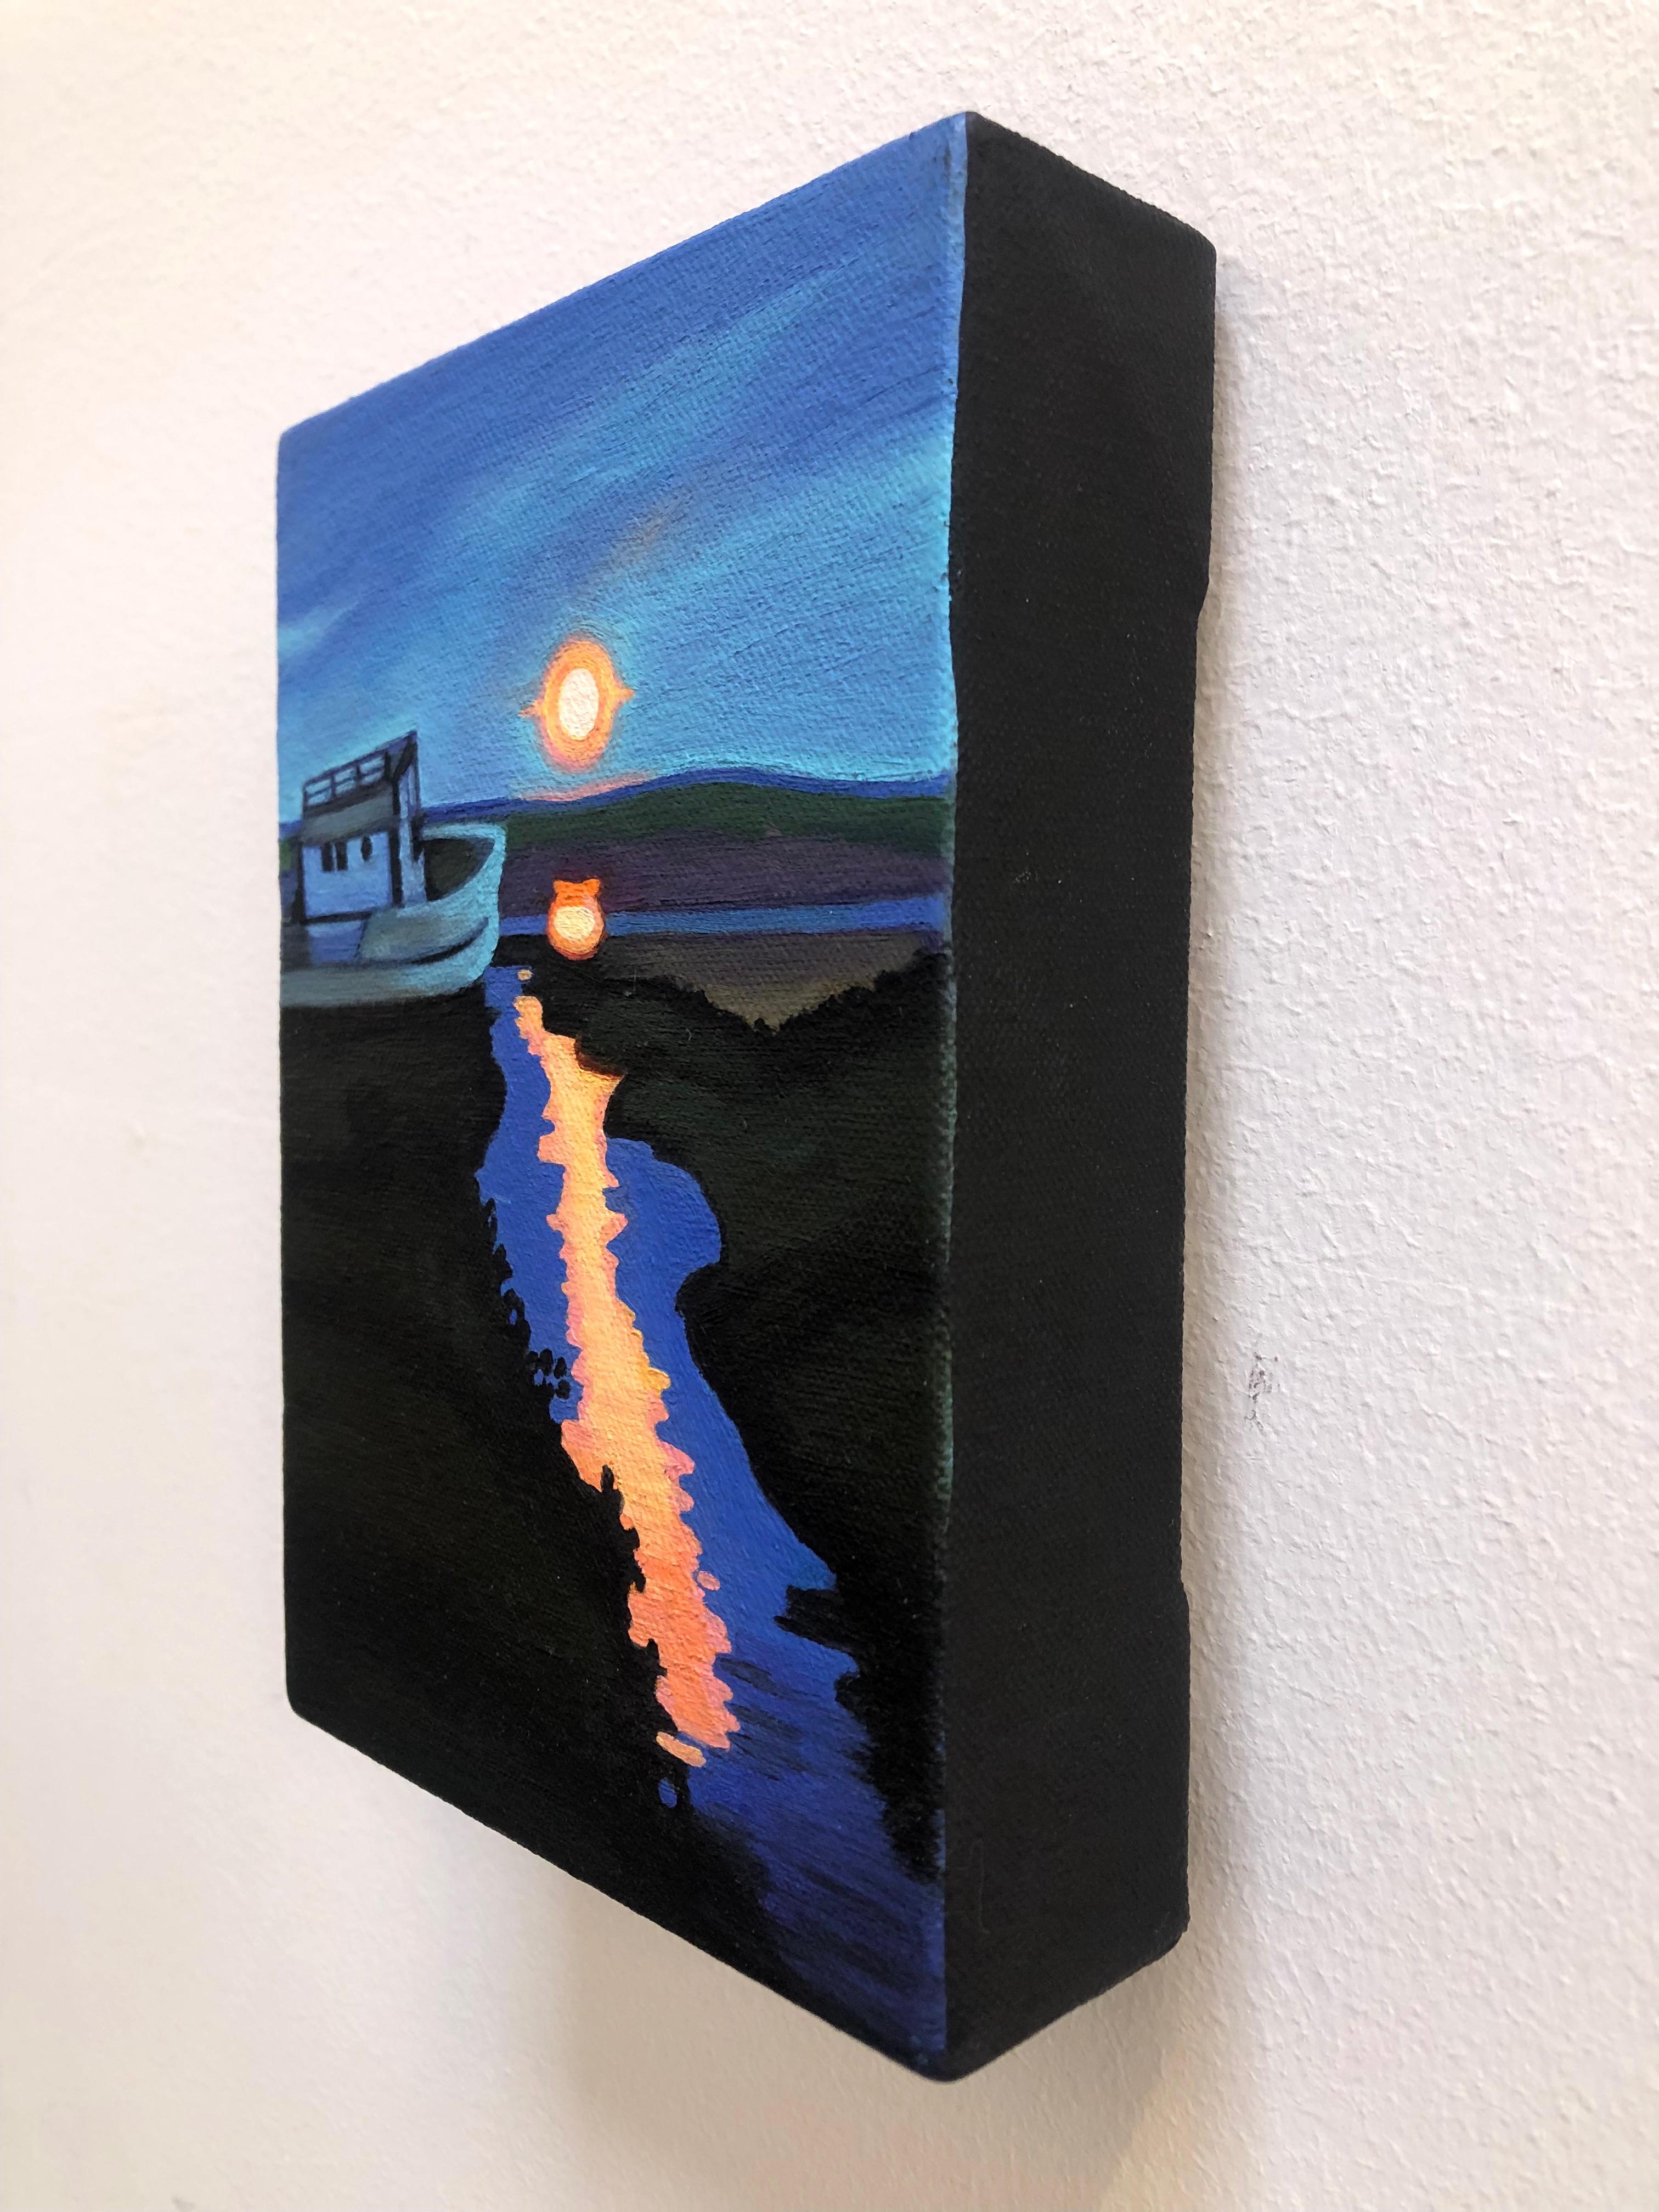 <p>Artist Comments<br>The Inverness shipwreck stands as an iconic landmark in the San Francisco Bay Area. Nestled in one of California's most picturesque locations, it has been immortalized in countless photographs, each documenting the landscape's